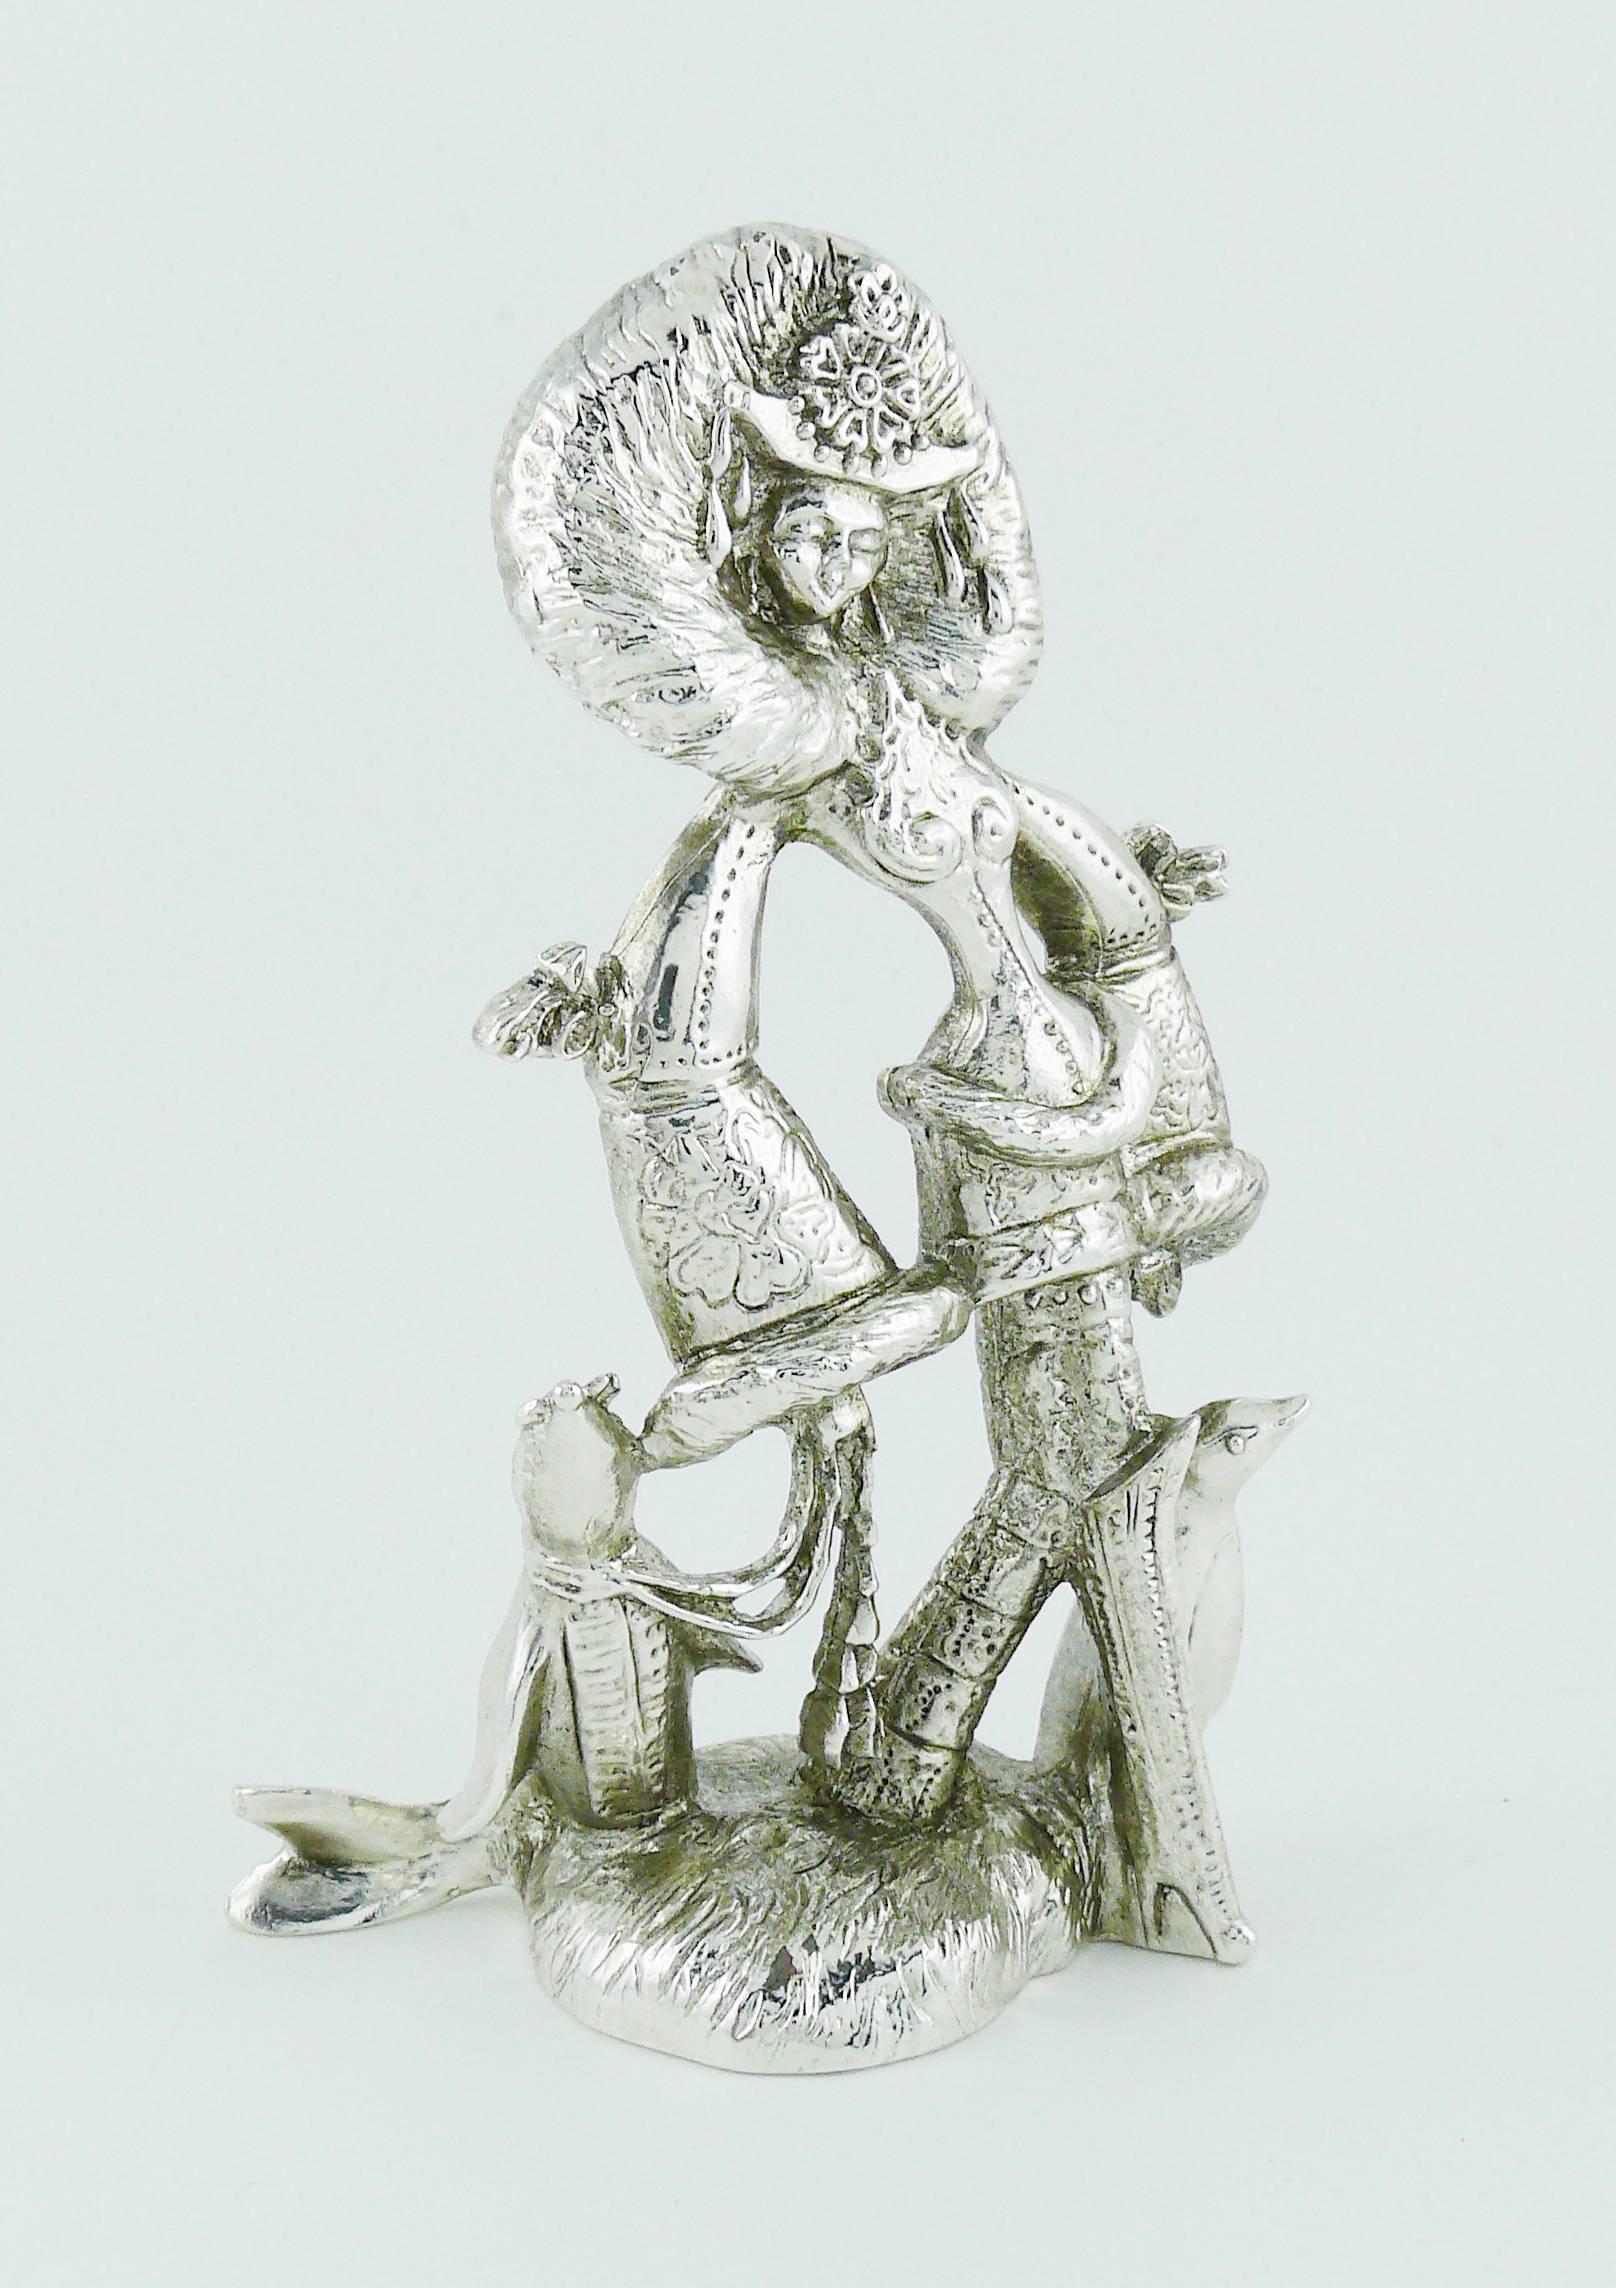 CHRISTIAN LACROIX vintage rare silver toned paperweight statue featuring a possible allegory of the Antarctica continent.

Collector item.

Embossed CHRISTIAN LACROIX France.
Maker's hallmarks.

Indicative measurements : height approx. 12.4 cm (4.88